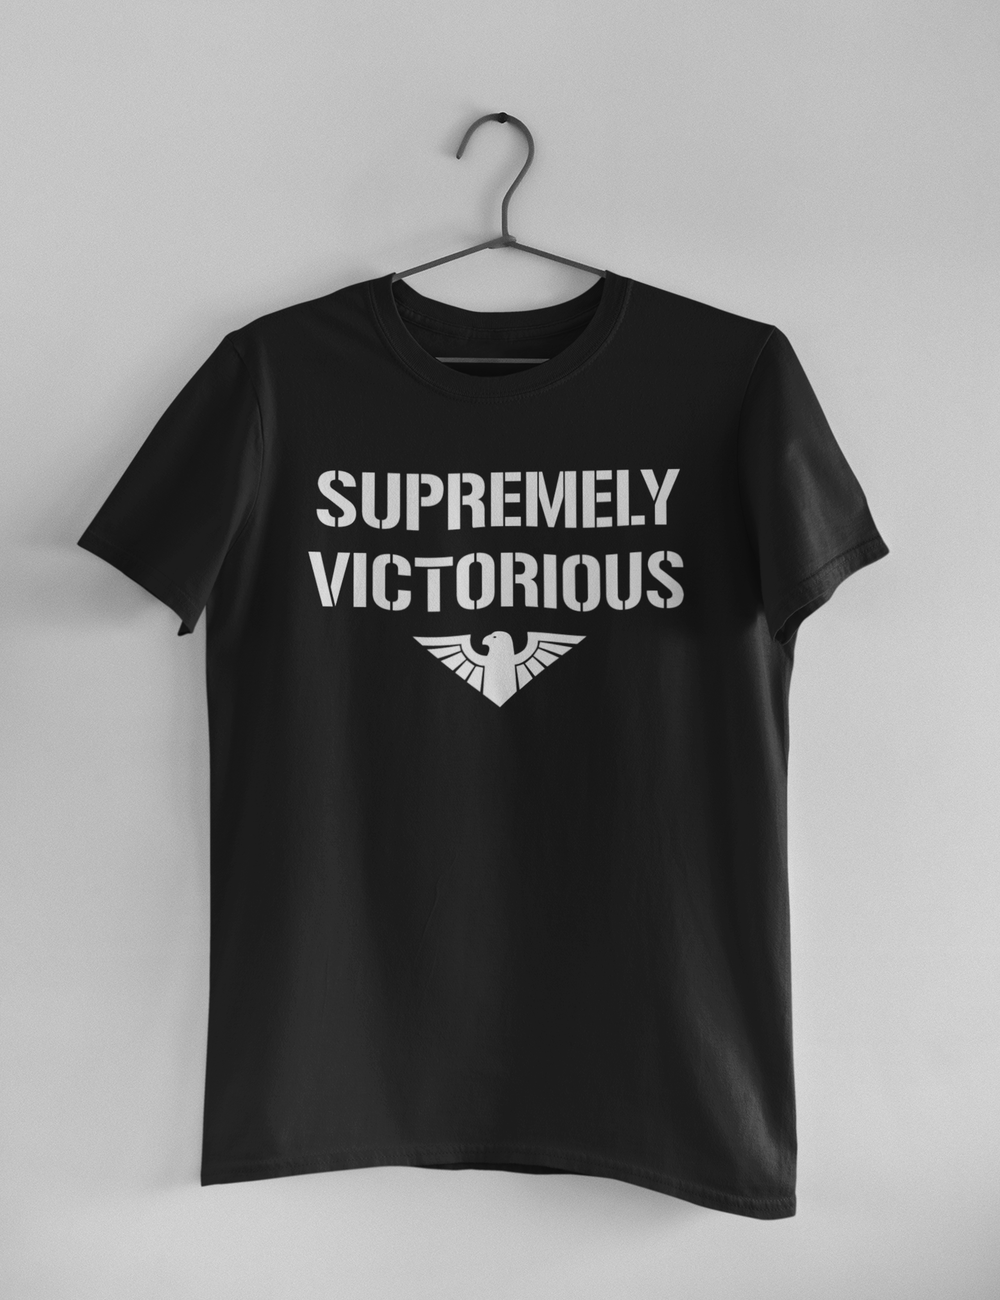 Supremely Victorious | Men's Fitted T-Shirt OniTakai